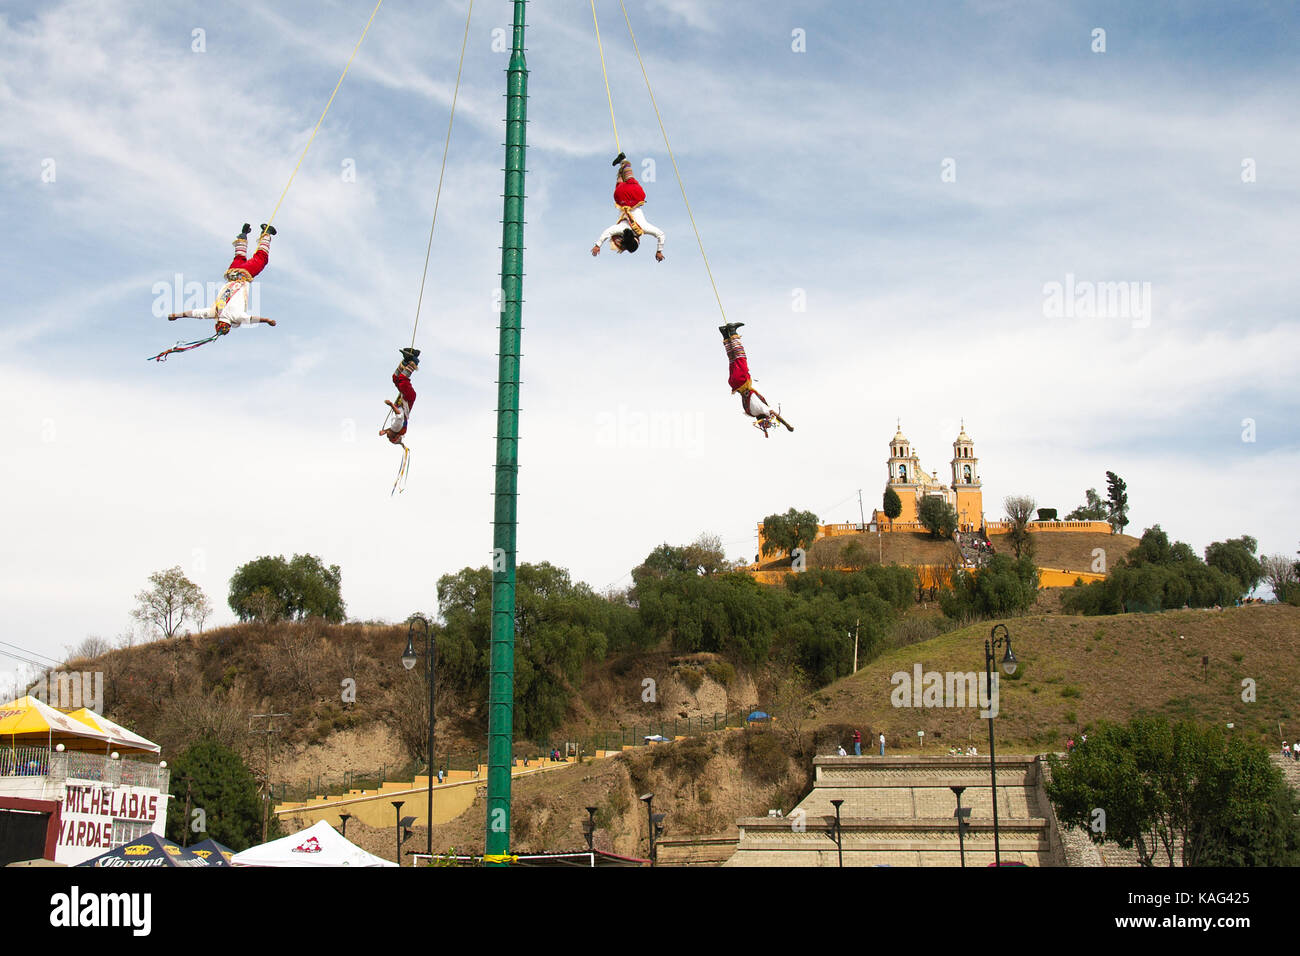 Cholula, Puebla, Mexico - 2016: Acrobats known as Los Voladores perform in font of the Great Pyramid of Cholula. Stock Photo